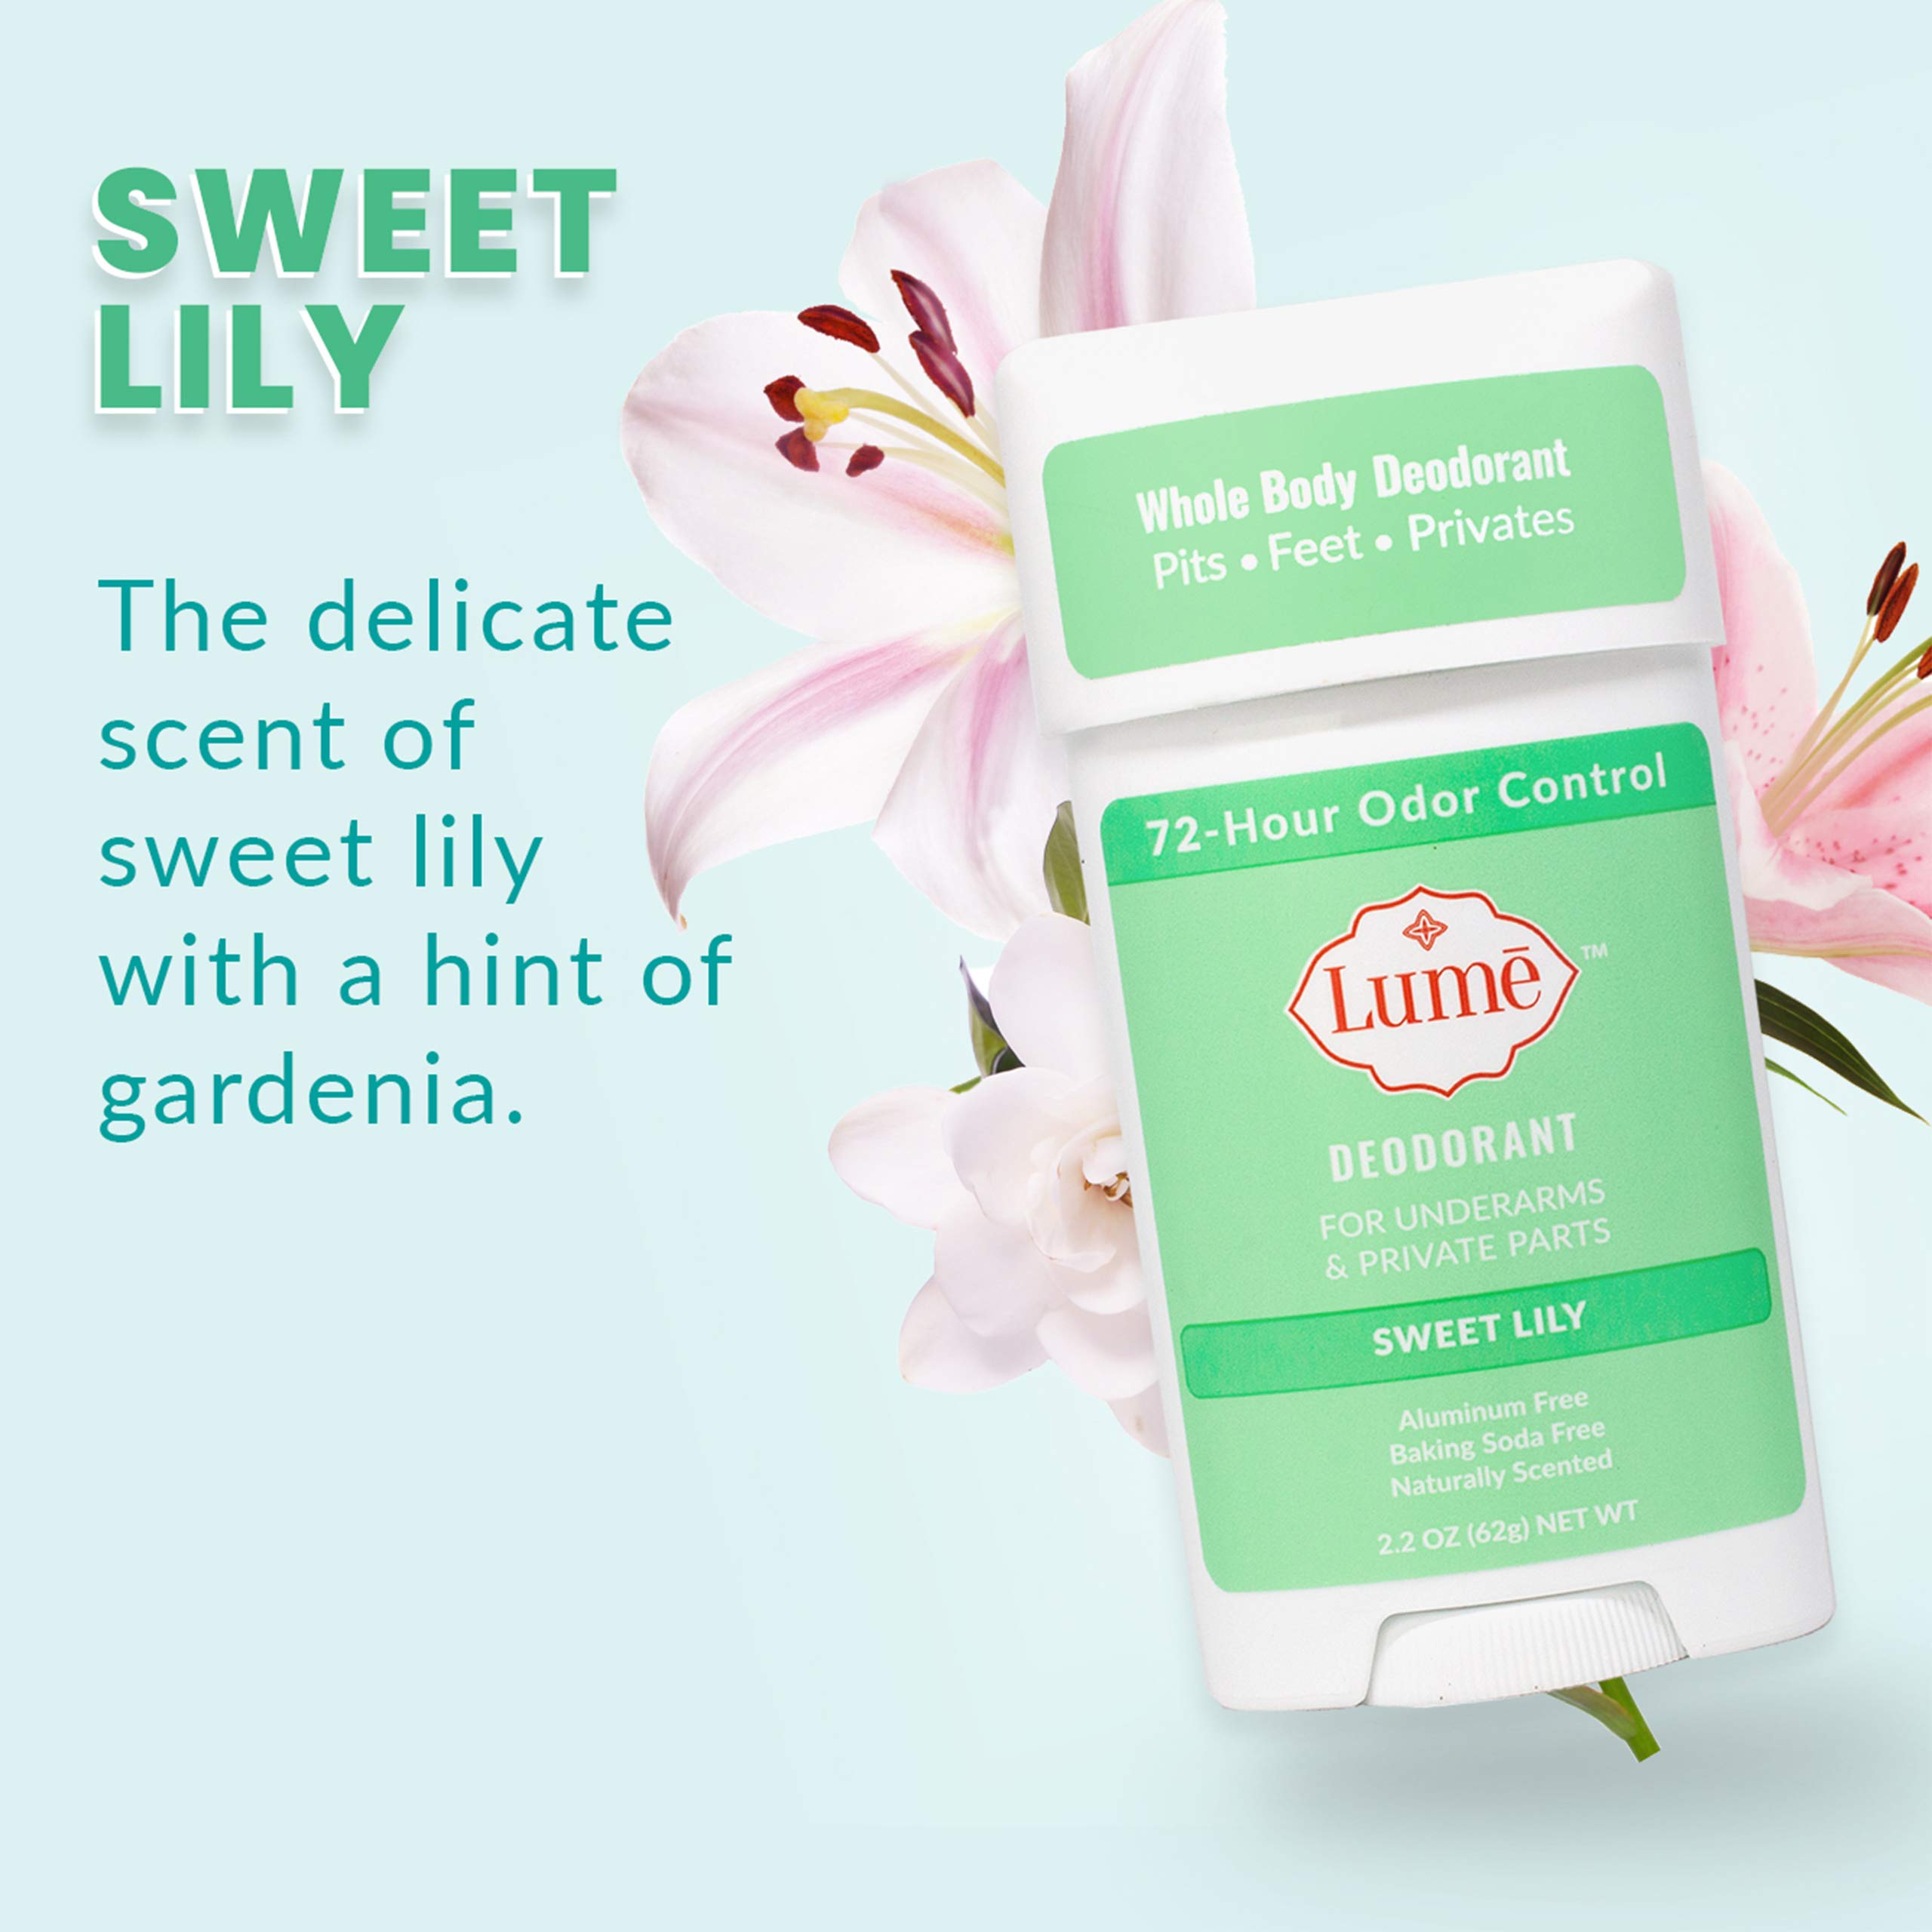 Lume Natural Deodorant (Sweet Lily)- Underarms and Private Parts - Aluminum Free, Baking Soda Free, Hypoallergenic, and Safe For Sensitive Skin - Propel Stick